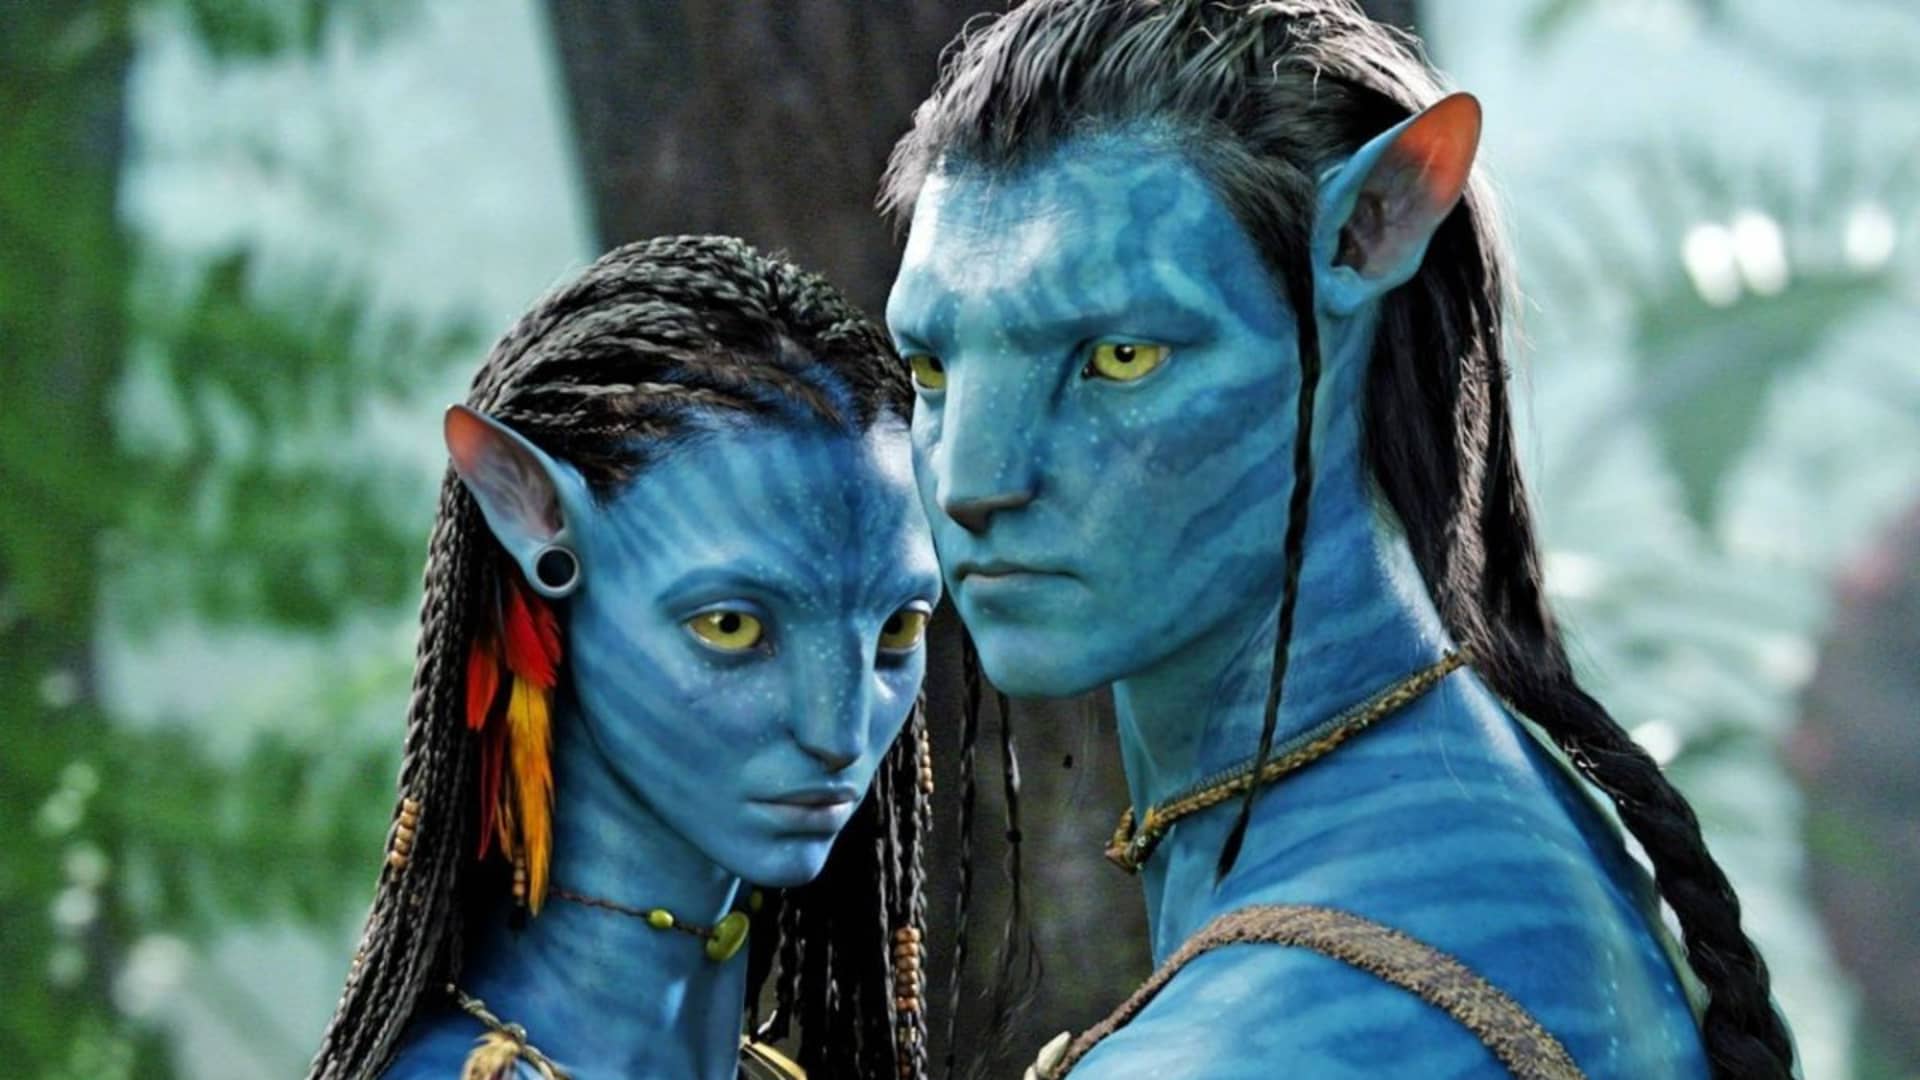 'Avatar,' Spider-Man and Star Wars return to the big screen as summer box office winds down